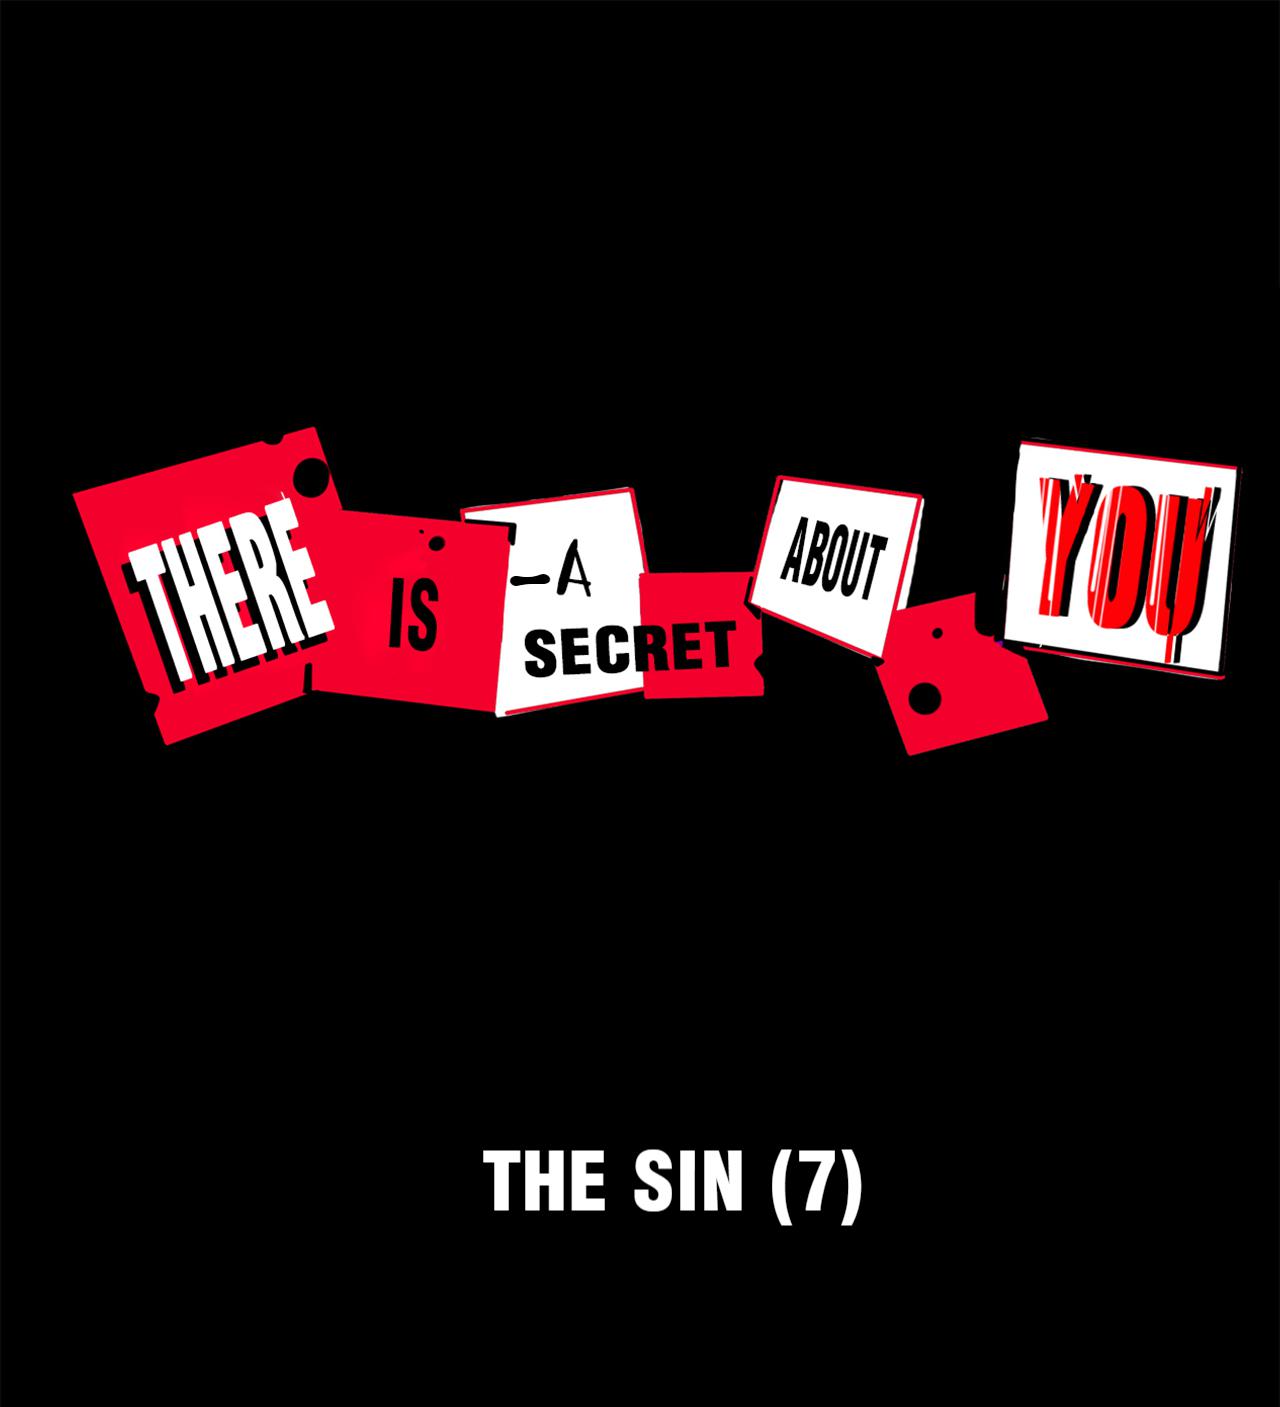 There Is a Secret About You 65